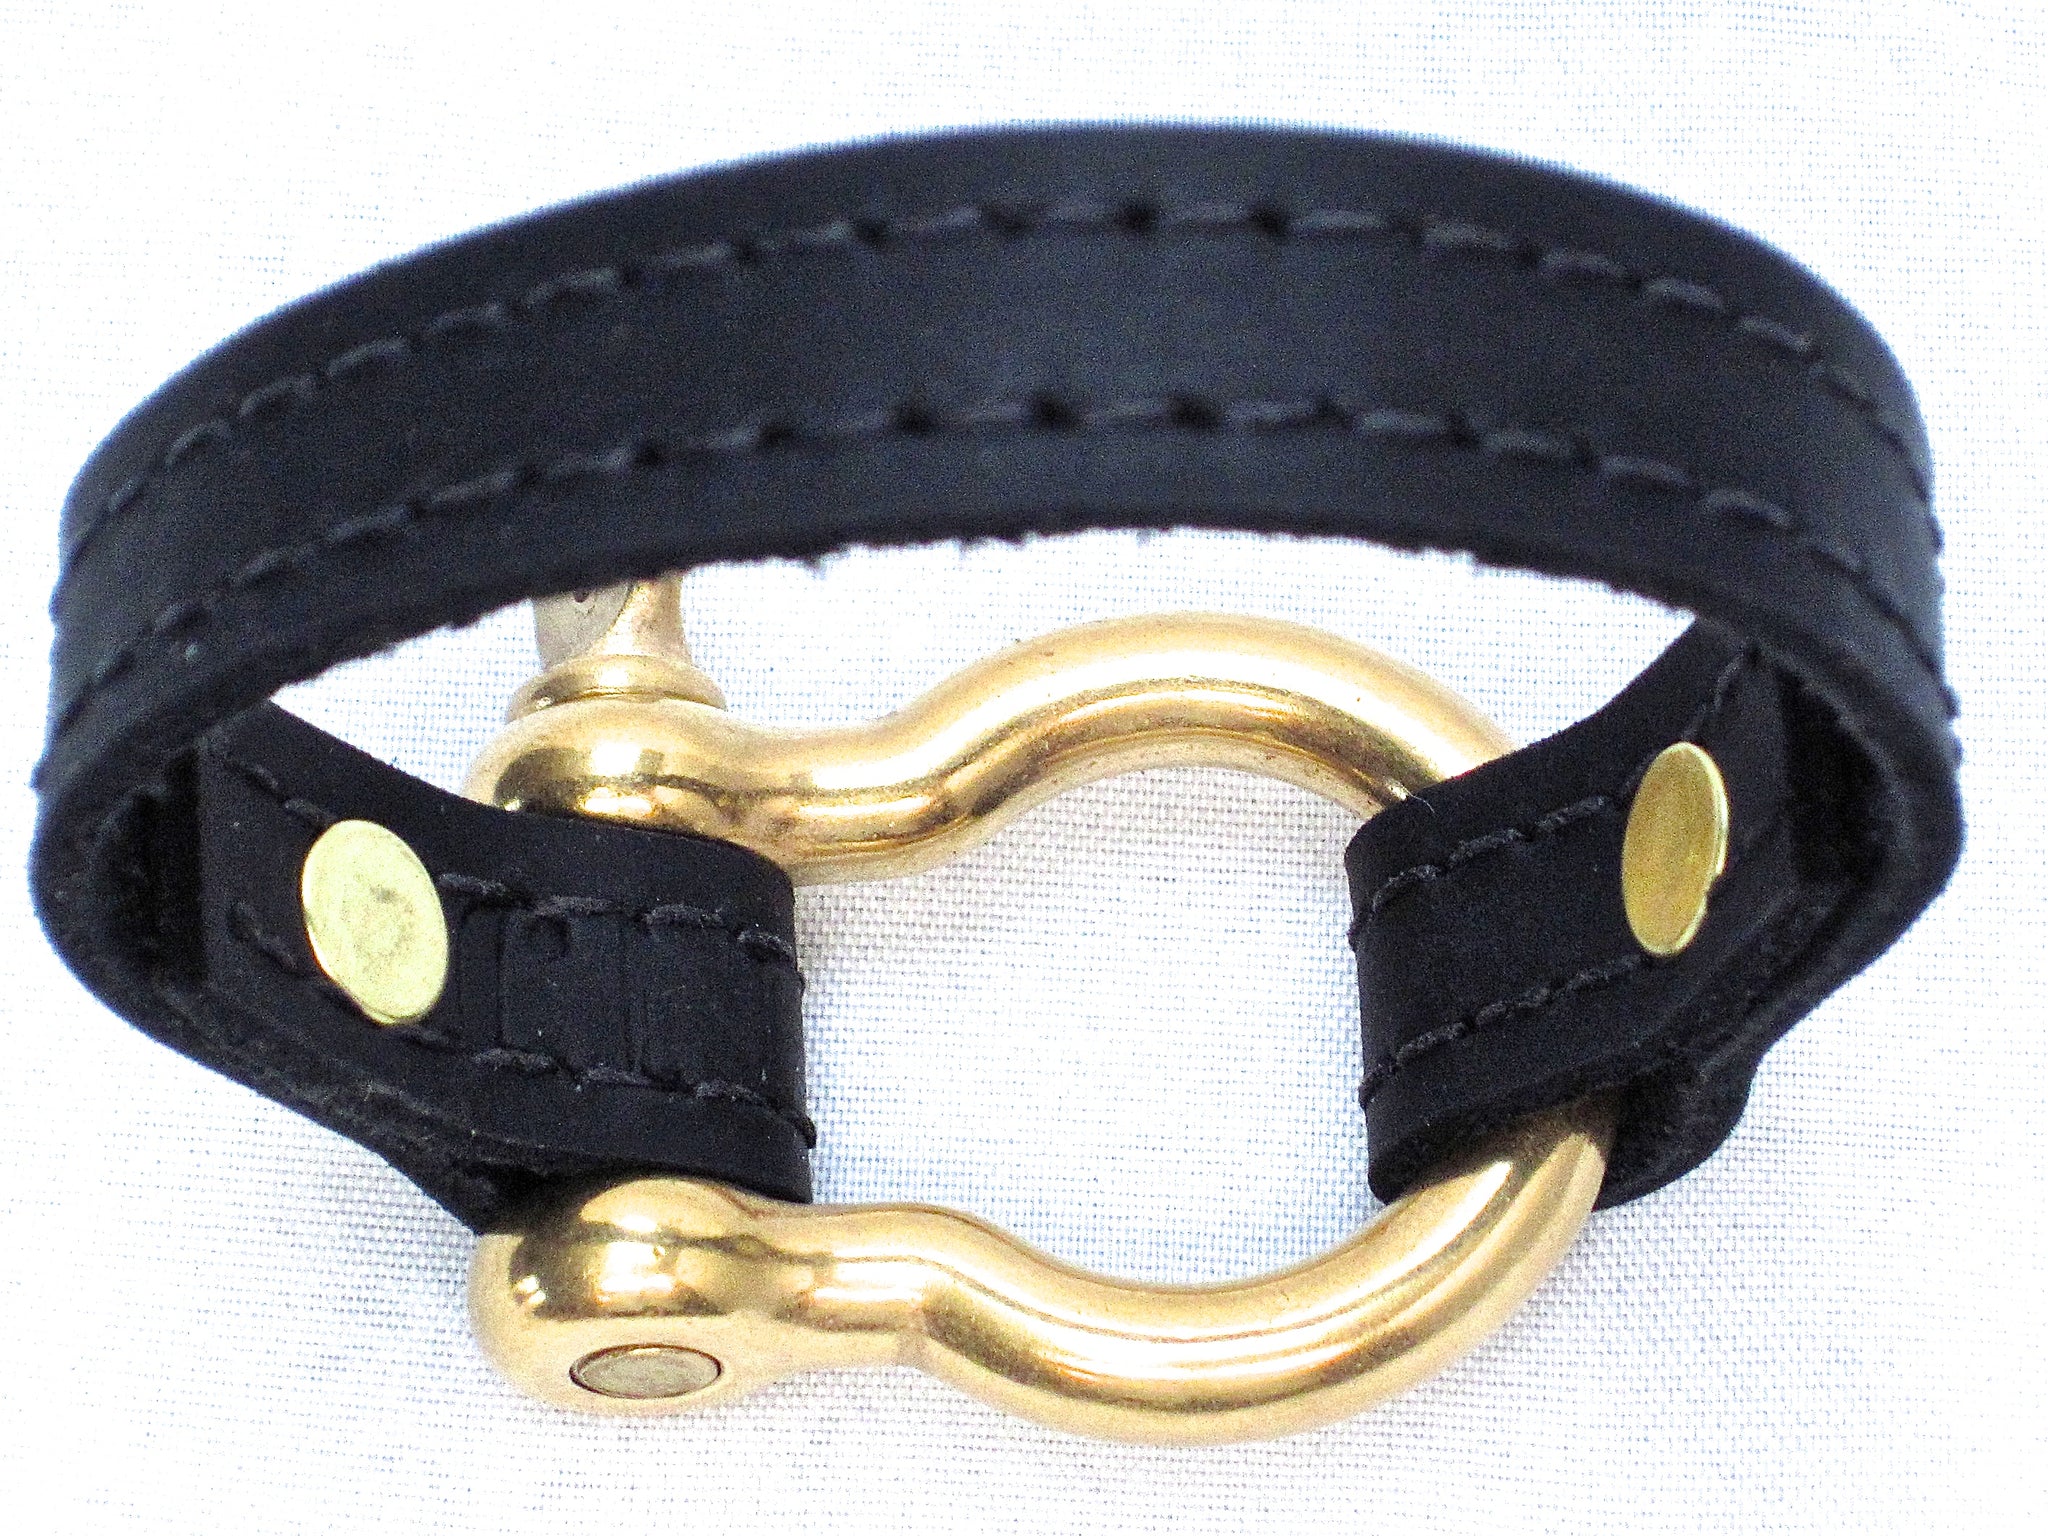 Nyet jewelry Signature Gold Bracelet Black by nyet jewelry.